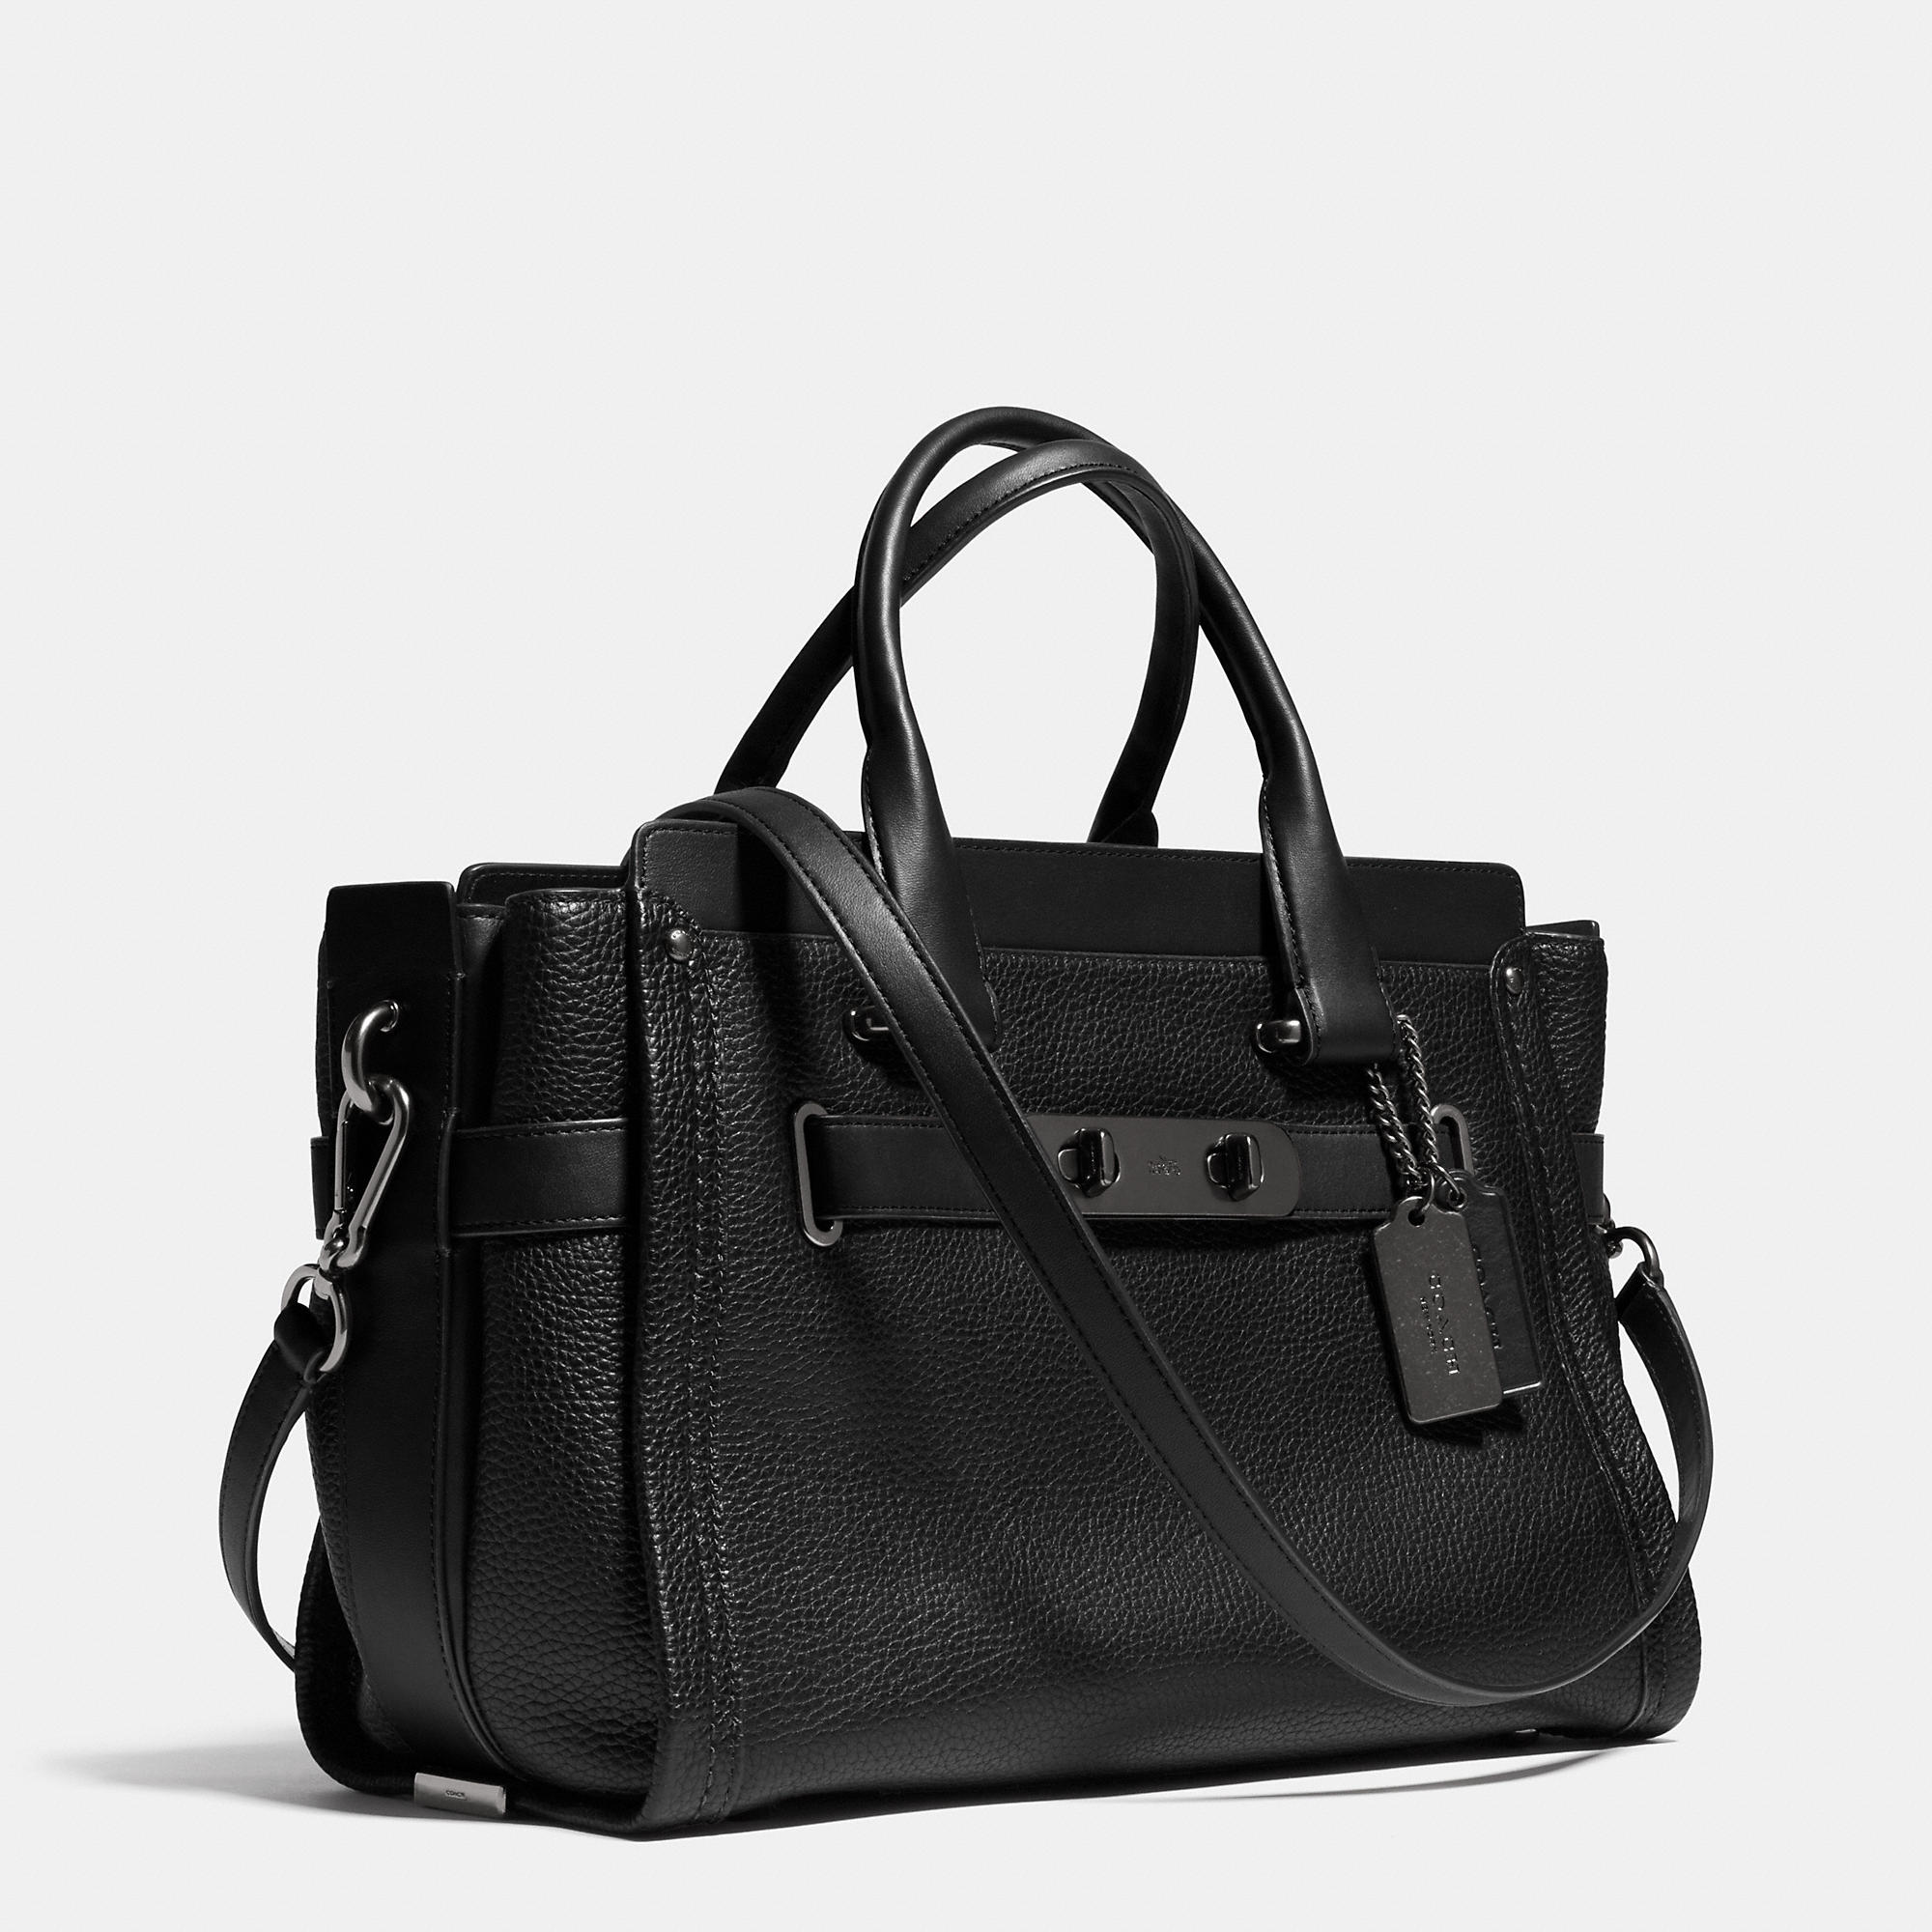 Causual Coach Swagger Carryall In Pebble Leather [coach20210018] - $63. ...